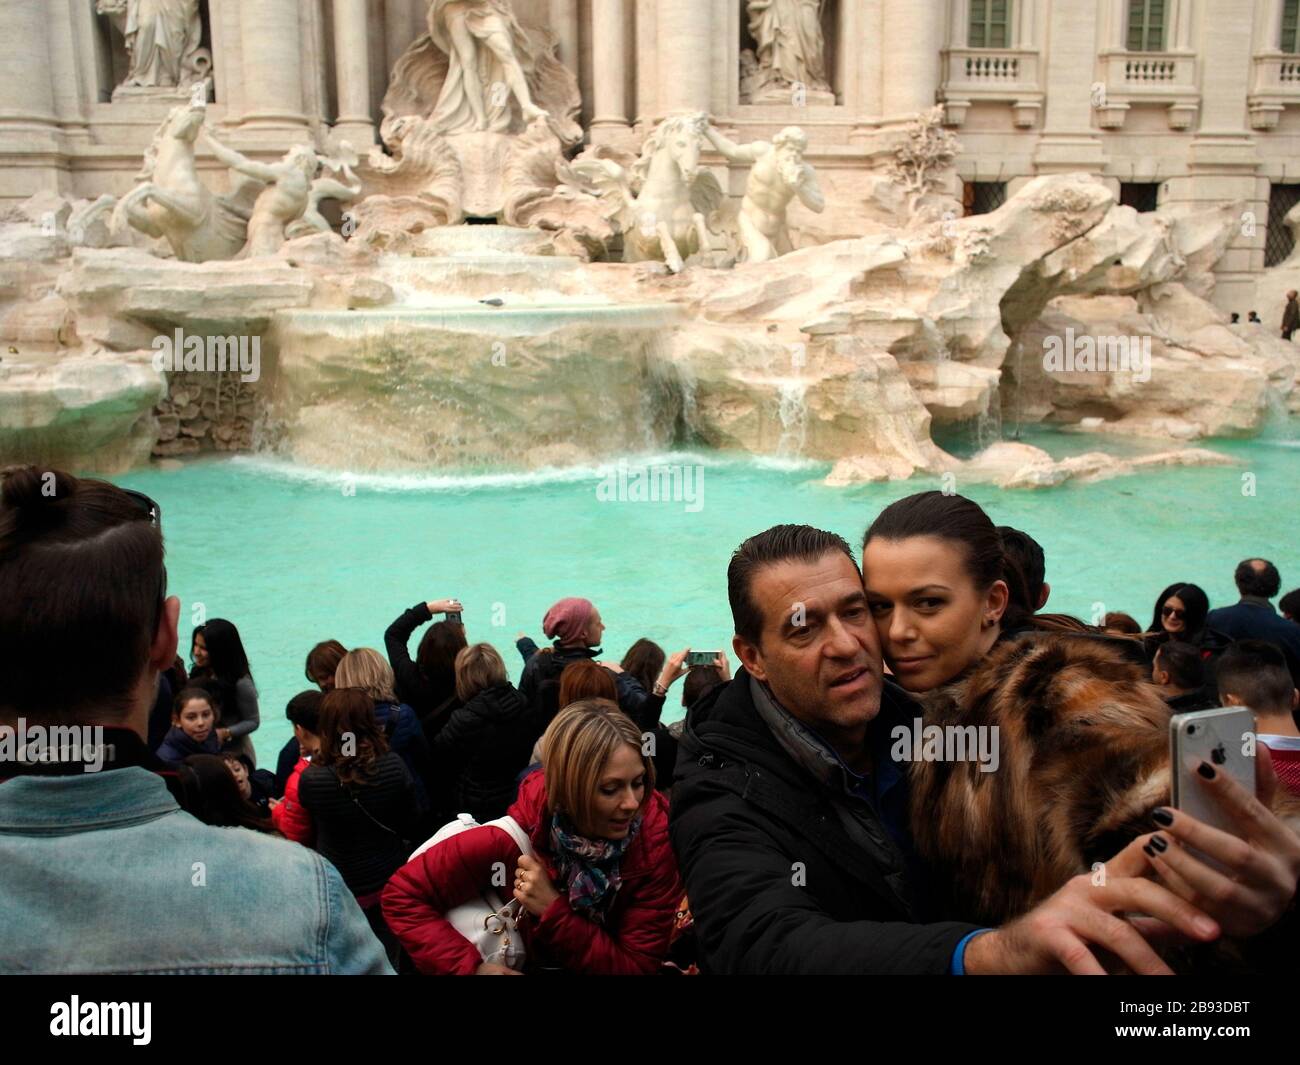 AJAXNETPHOTO. ROME, ITALY. - FOUNTAIN CROWDS - TOURISTS AT THE TREVI FOUNTAIN - FONTANA DE TREVI. FOUNTAIN IS IN THE TREVI DISTRICT. BAROQUE DESIGN BY NICOLA SALVI AND COMPLETED BY GIUSEPPE PANNINI.PHOTO:JONATHAN EASTLAND/AJAX REF:GXR151012 5839 1 Stock Photo